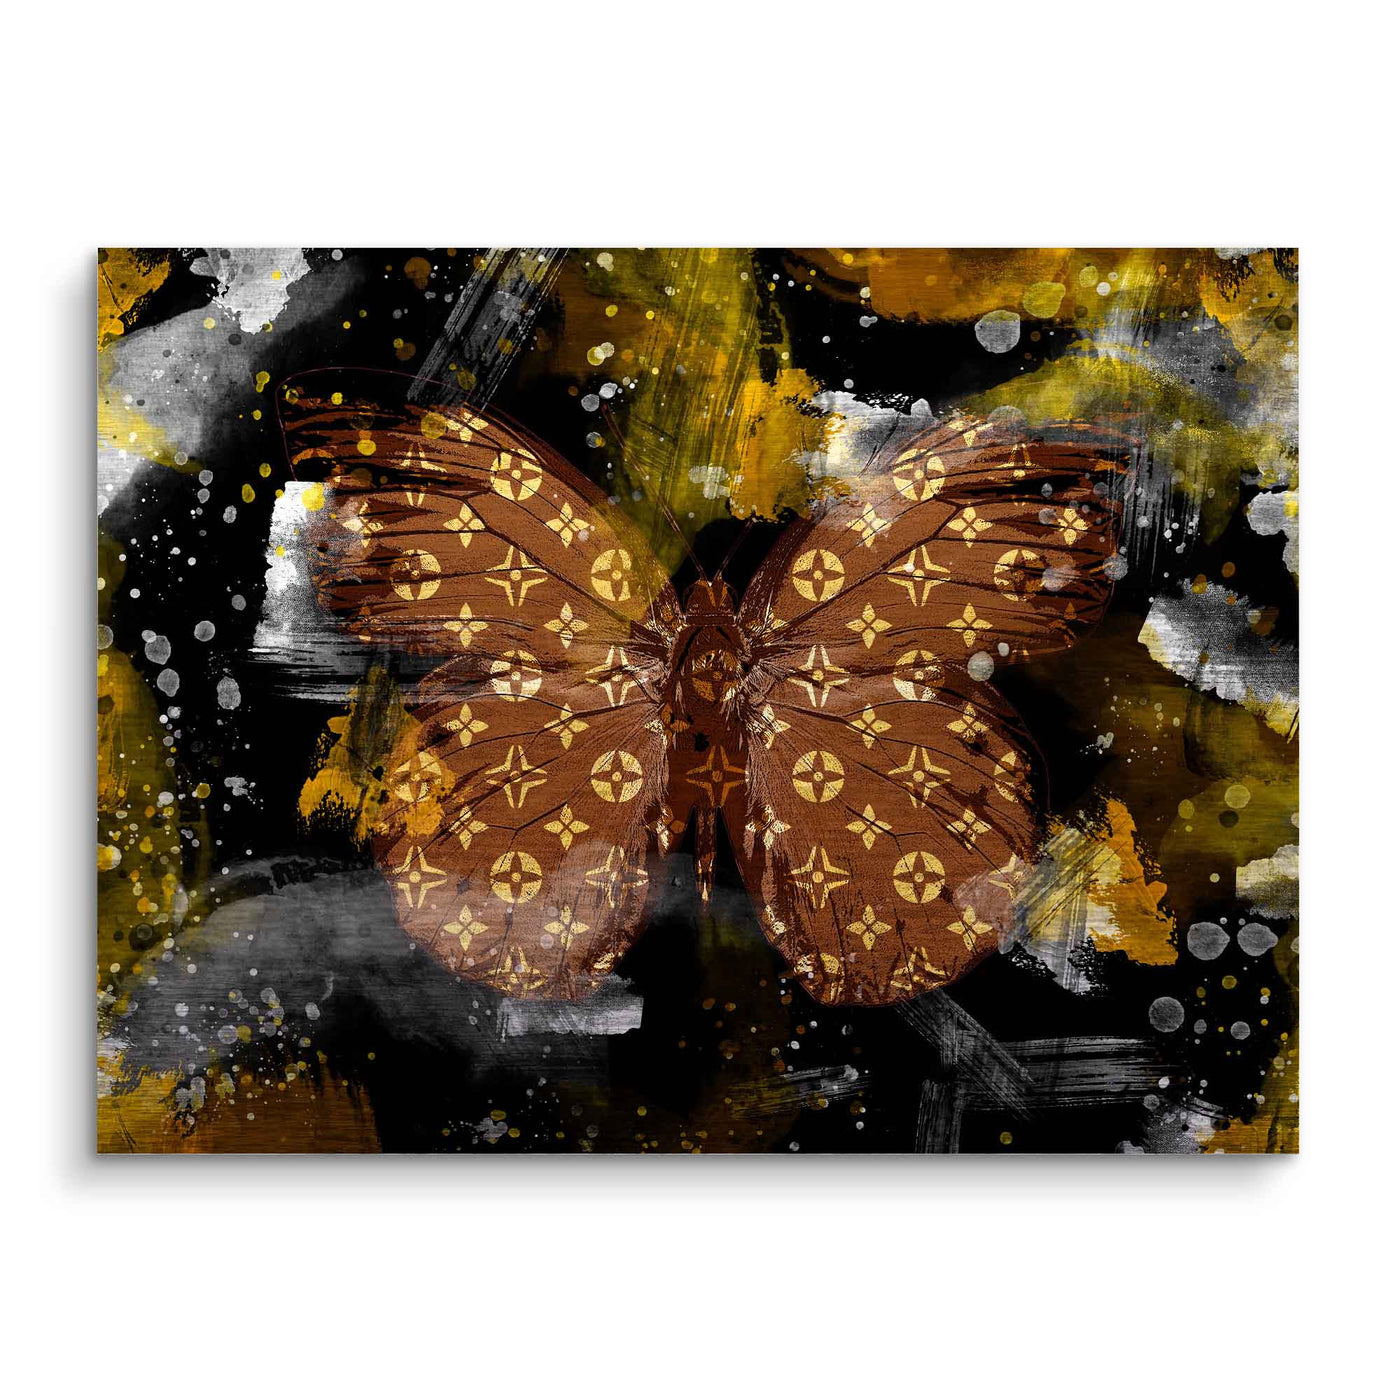 Butterfly - Bronze Edition